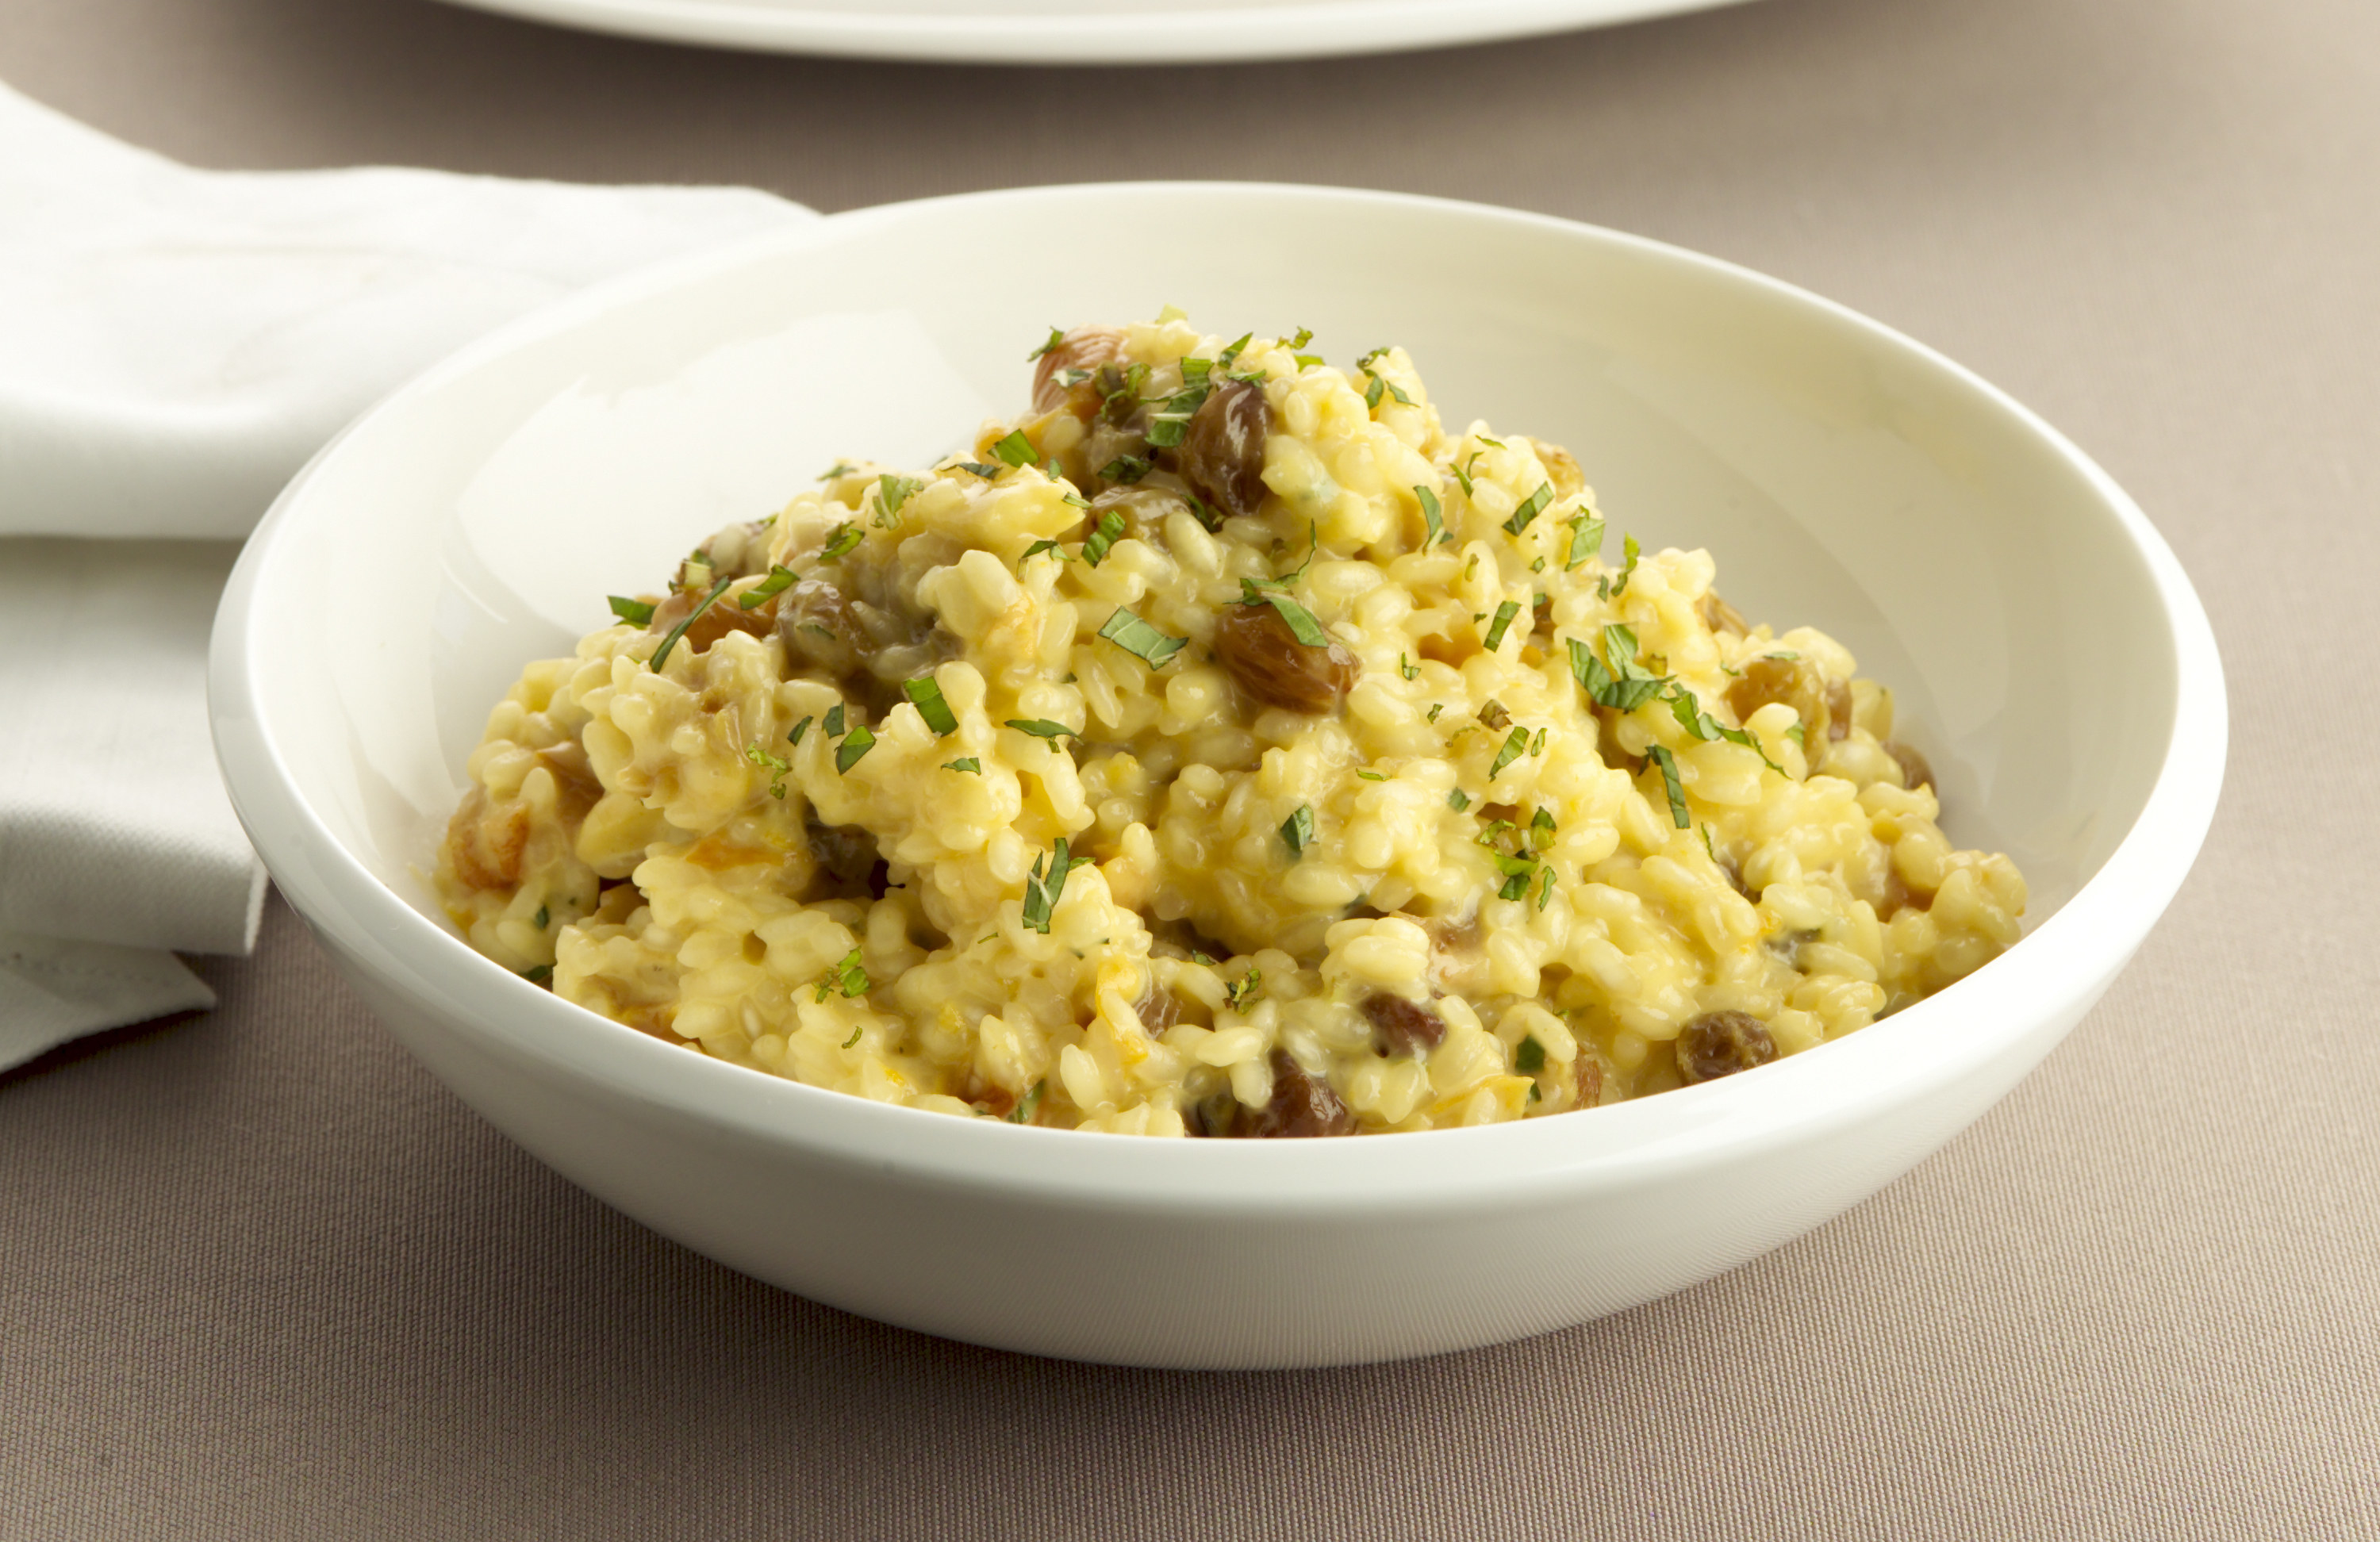 A bowl of risotto.